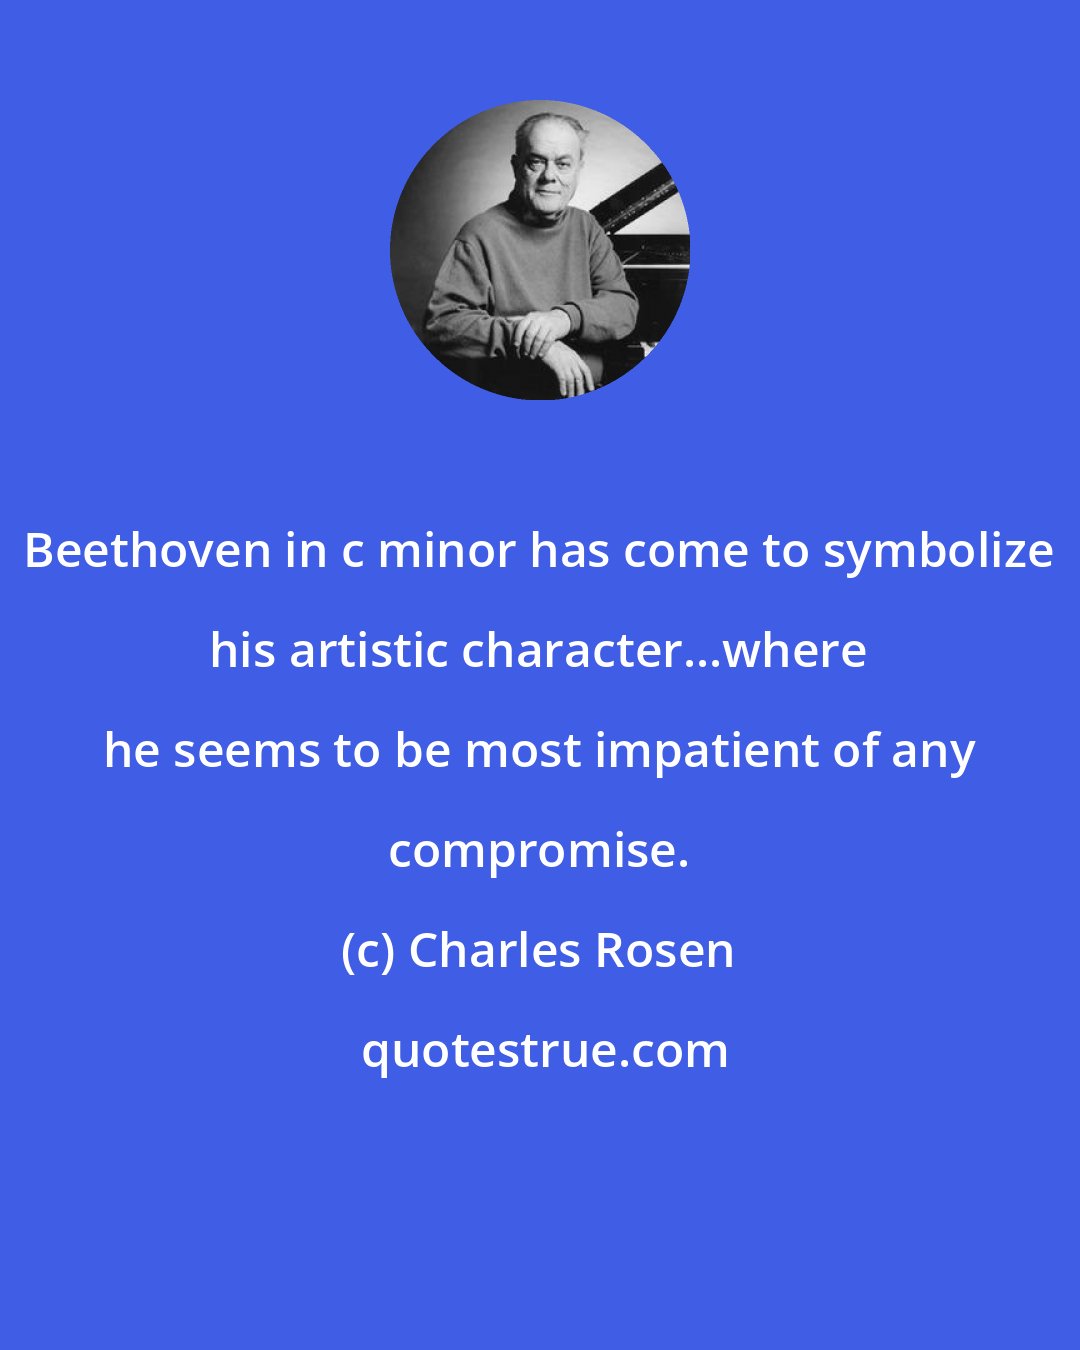 Charles Rosen: Beethoven in c minor has come to symbolize his artistic character...where he seems to be most impatient of any compromise.